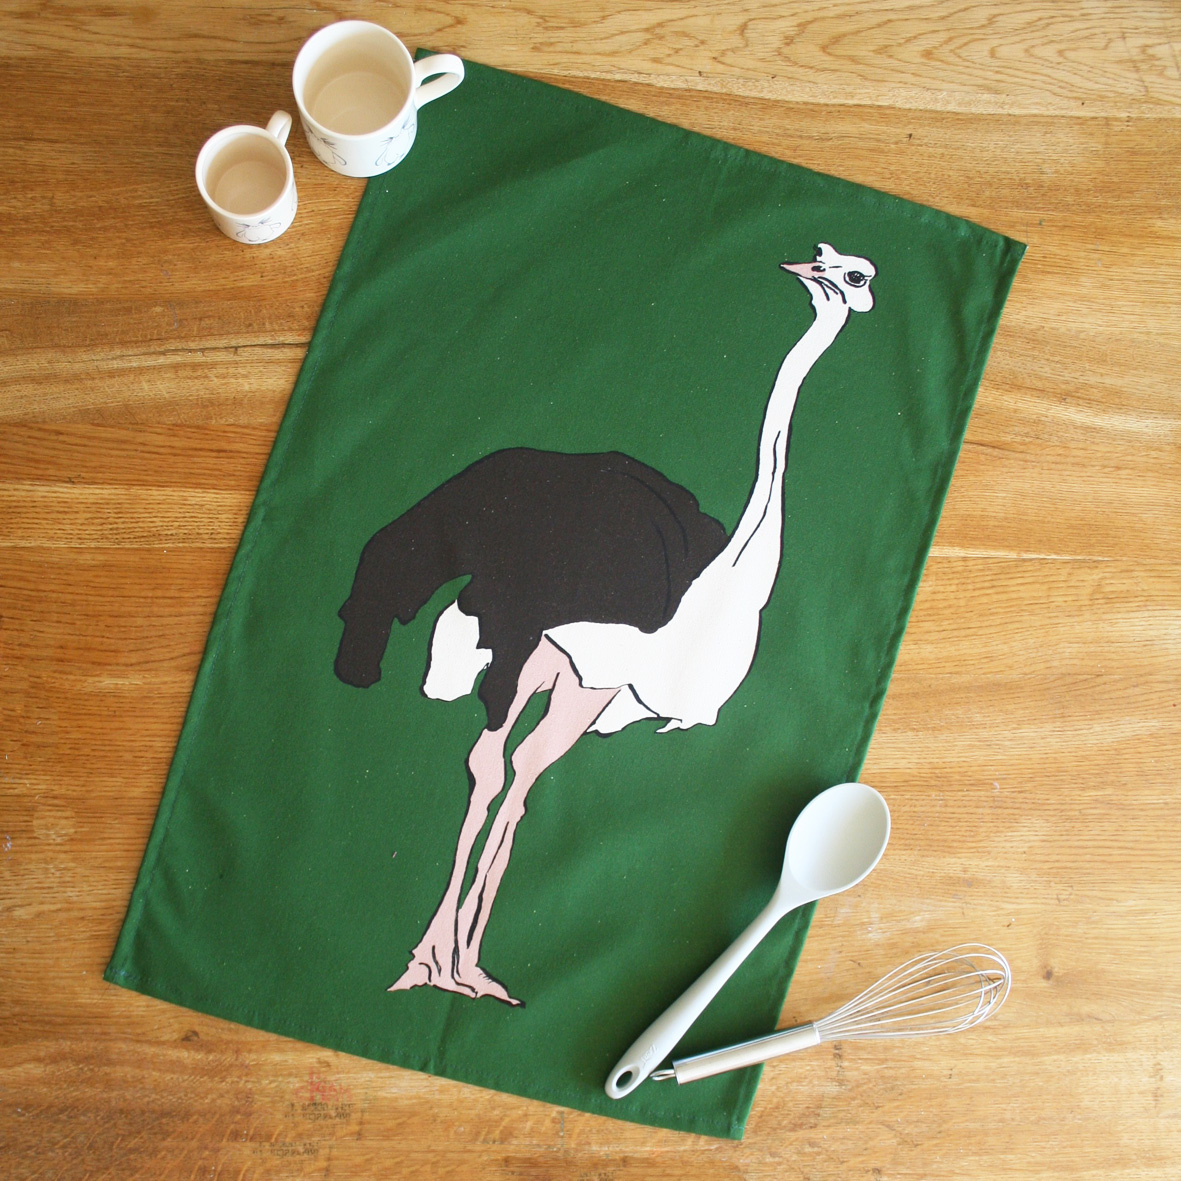 🌿🦩 Get ready to strut your stuff in the kitchen with our Green Tea Towel! Featuring a fabulous crazy ostrich, it adds flair to your chores! 🎉  #ostrich #teatowel #teatowels #iloveteatowels #birdloversuk #giftsforher #giftsforhim #animallovergift #birdlovergifts